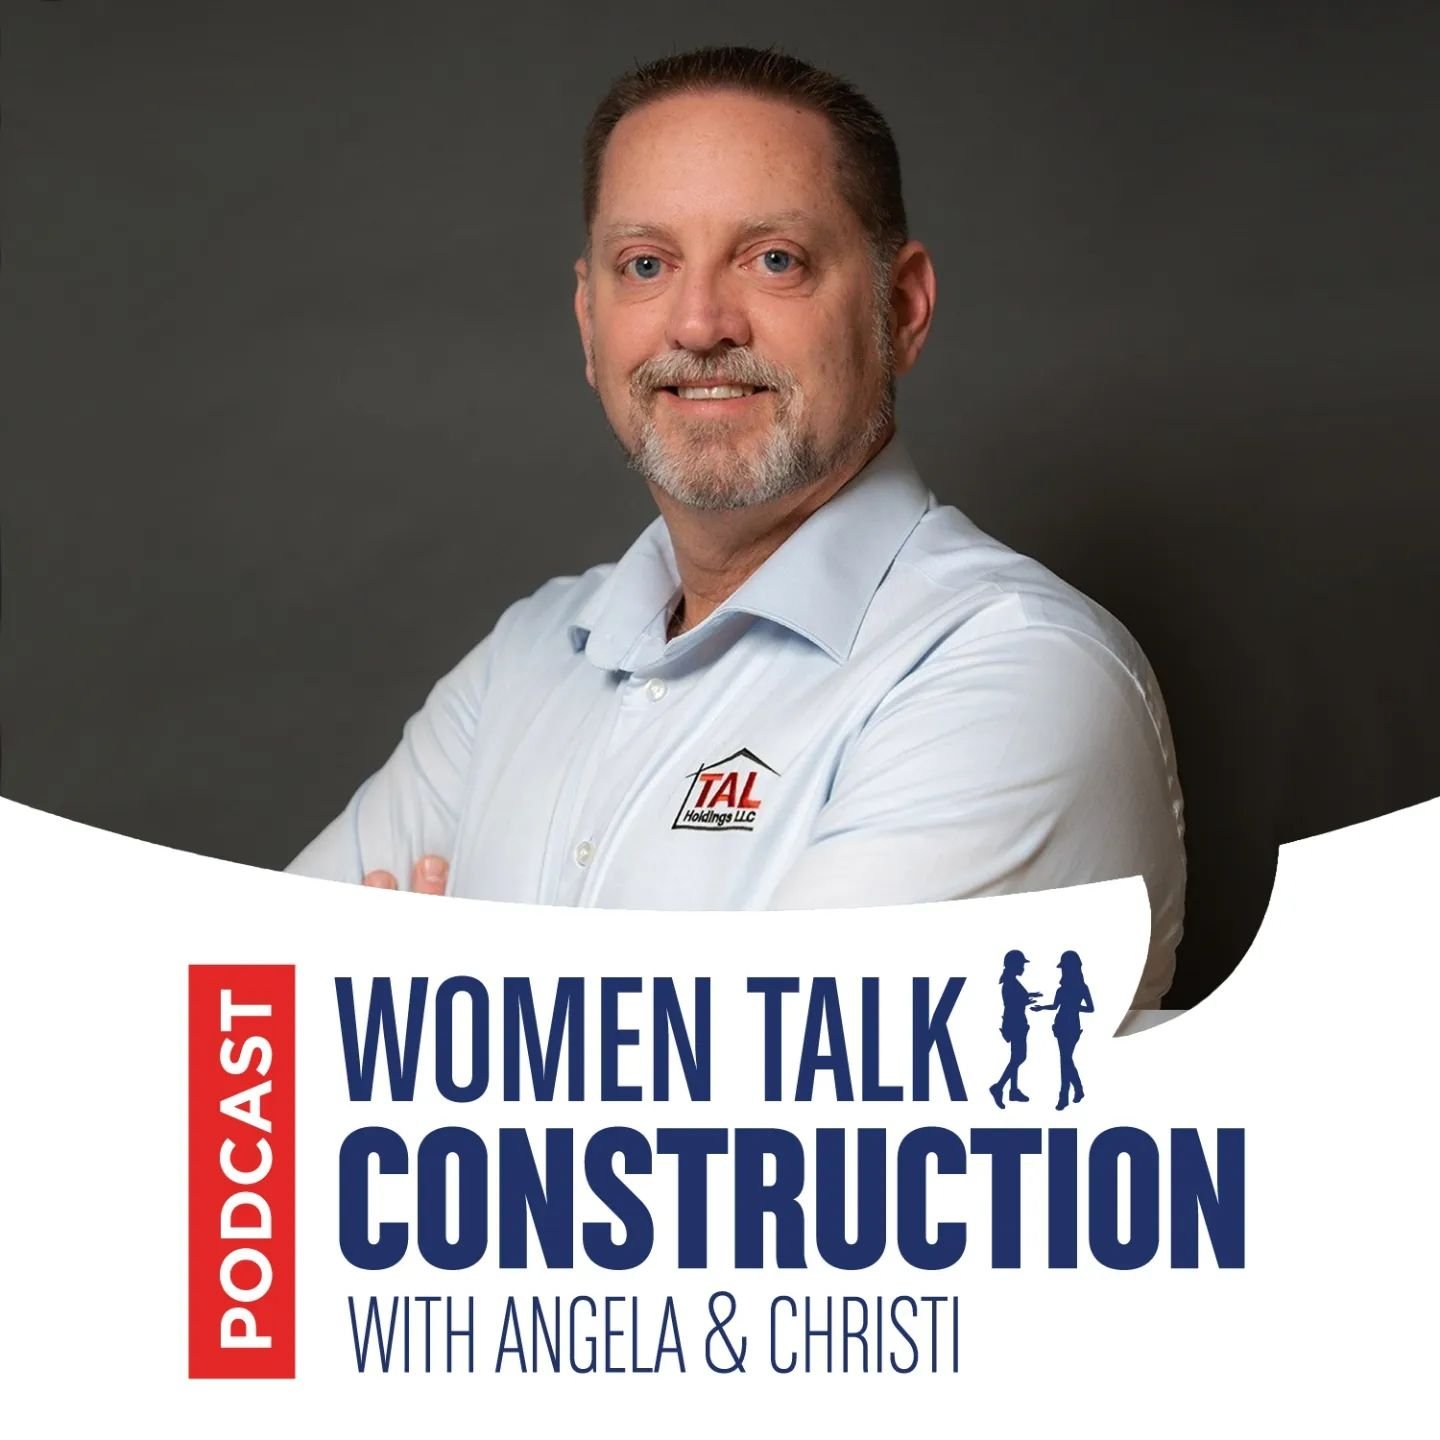 Do you want to &quot;Create an environment where EVERYONE can succeed?&quot;
.
Our next guest shares how he does it.
.
&lsquo;Attracting &amp; Retaining Women&rsquo;&nbsp;🎙️&nbsp;Jason Blair&nbsp;🎙️CEO at&nbsp;TAL Building Centers
.
🚀&nbsp;Five of